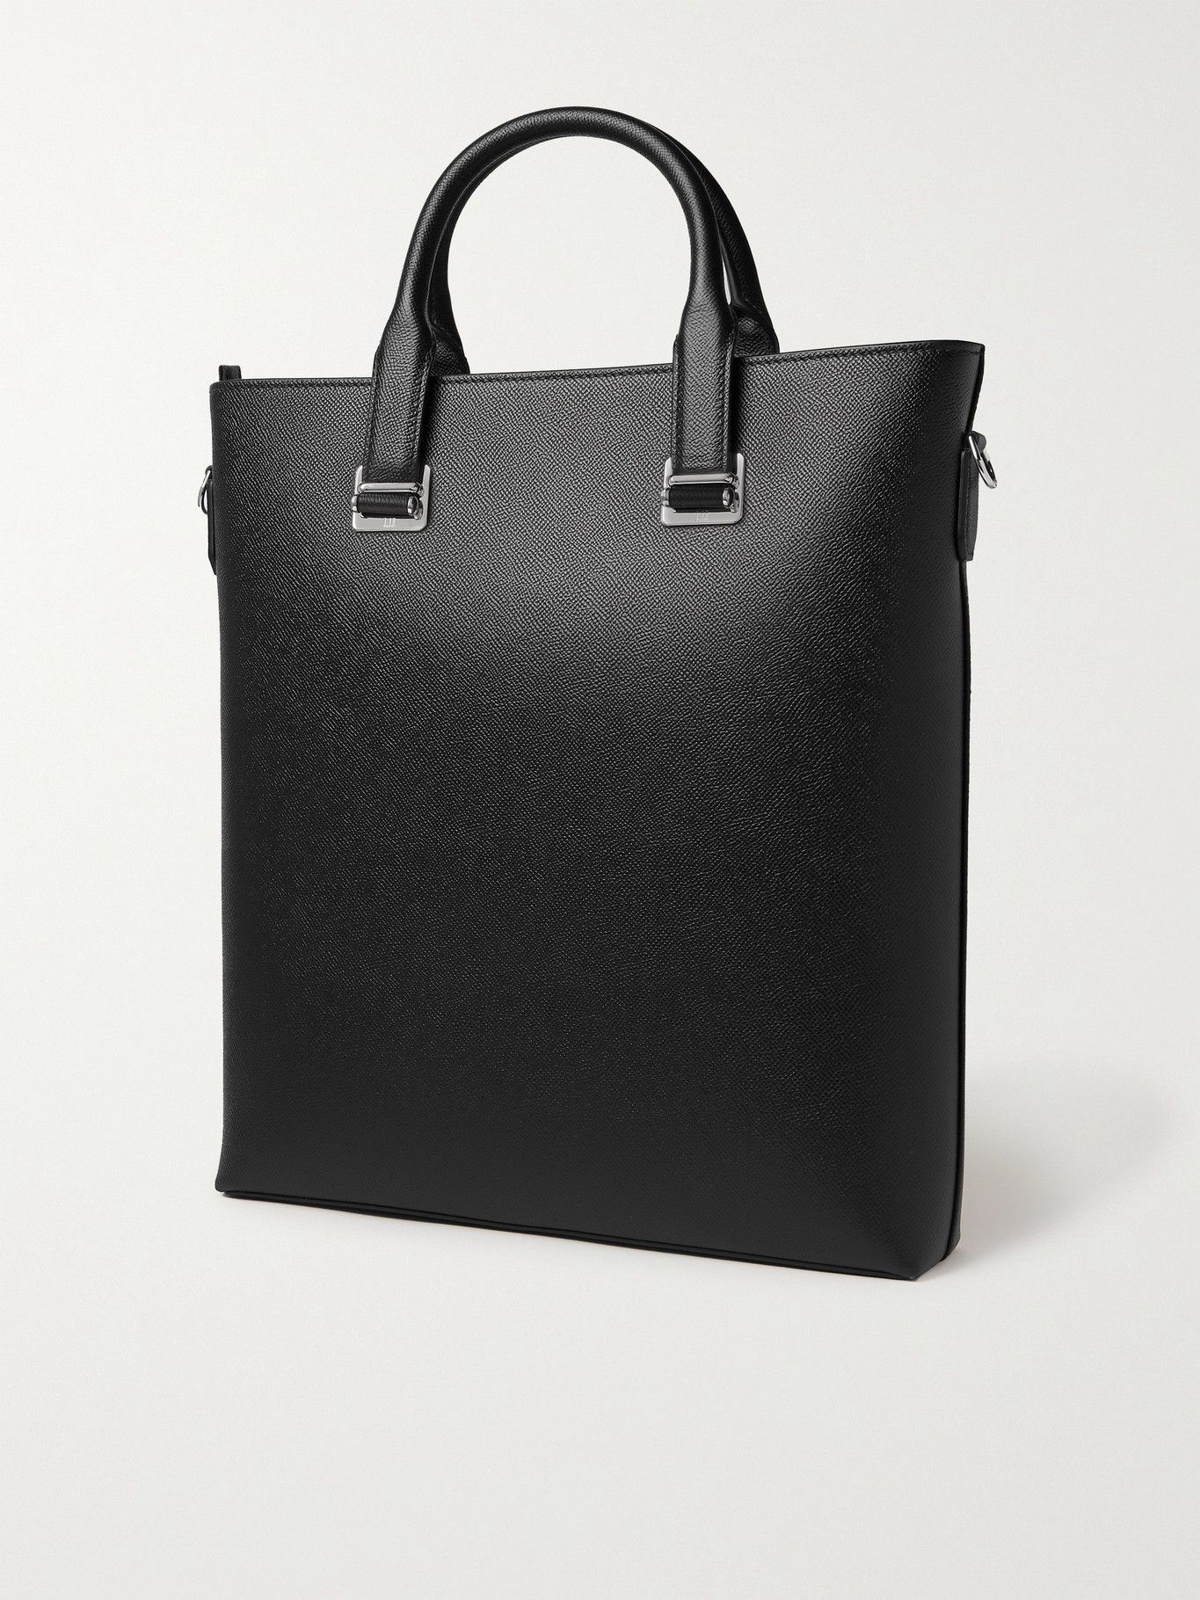 DUNHILL - Cross-Grain Leather Tote Bag Dunhill